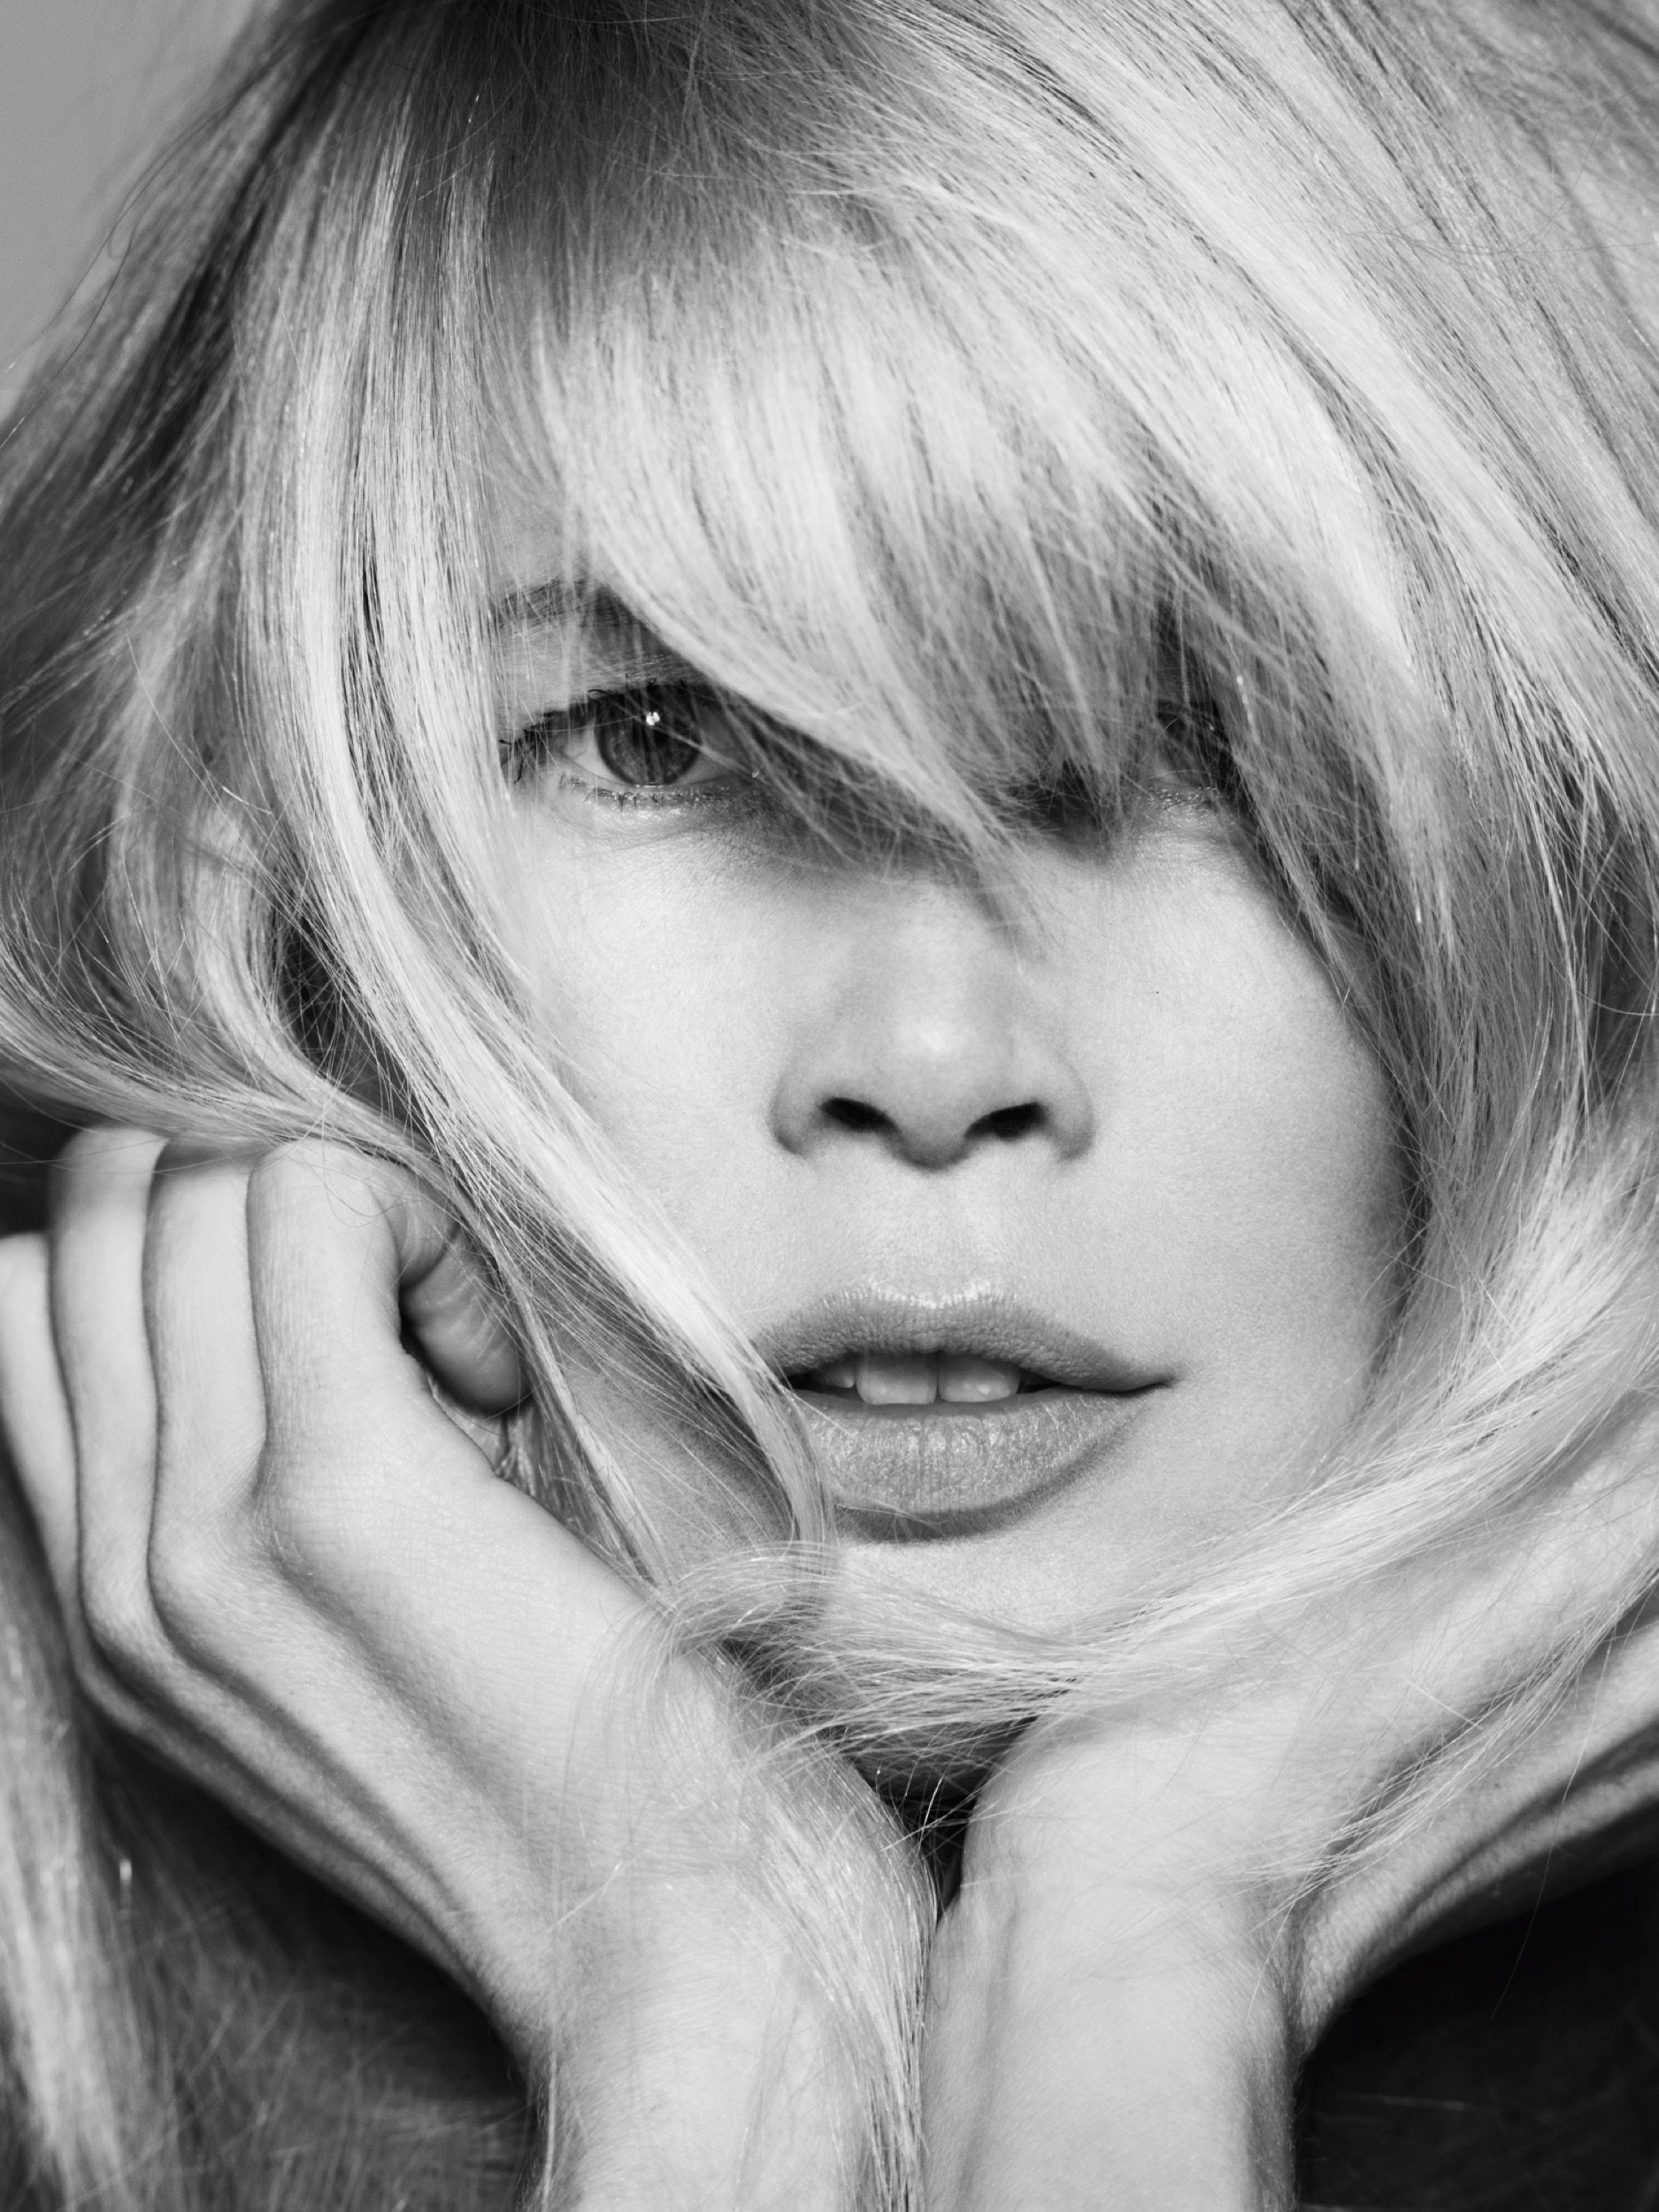 kathrin-hohberg-vogue-claudia-schiffer-jan-welters-06